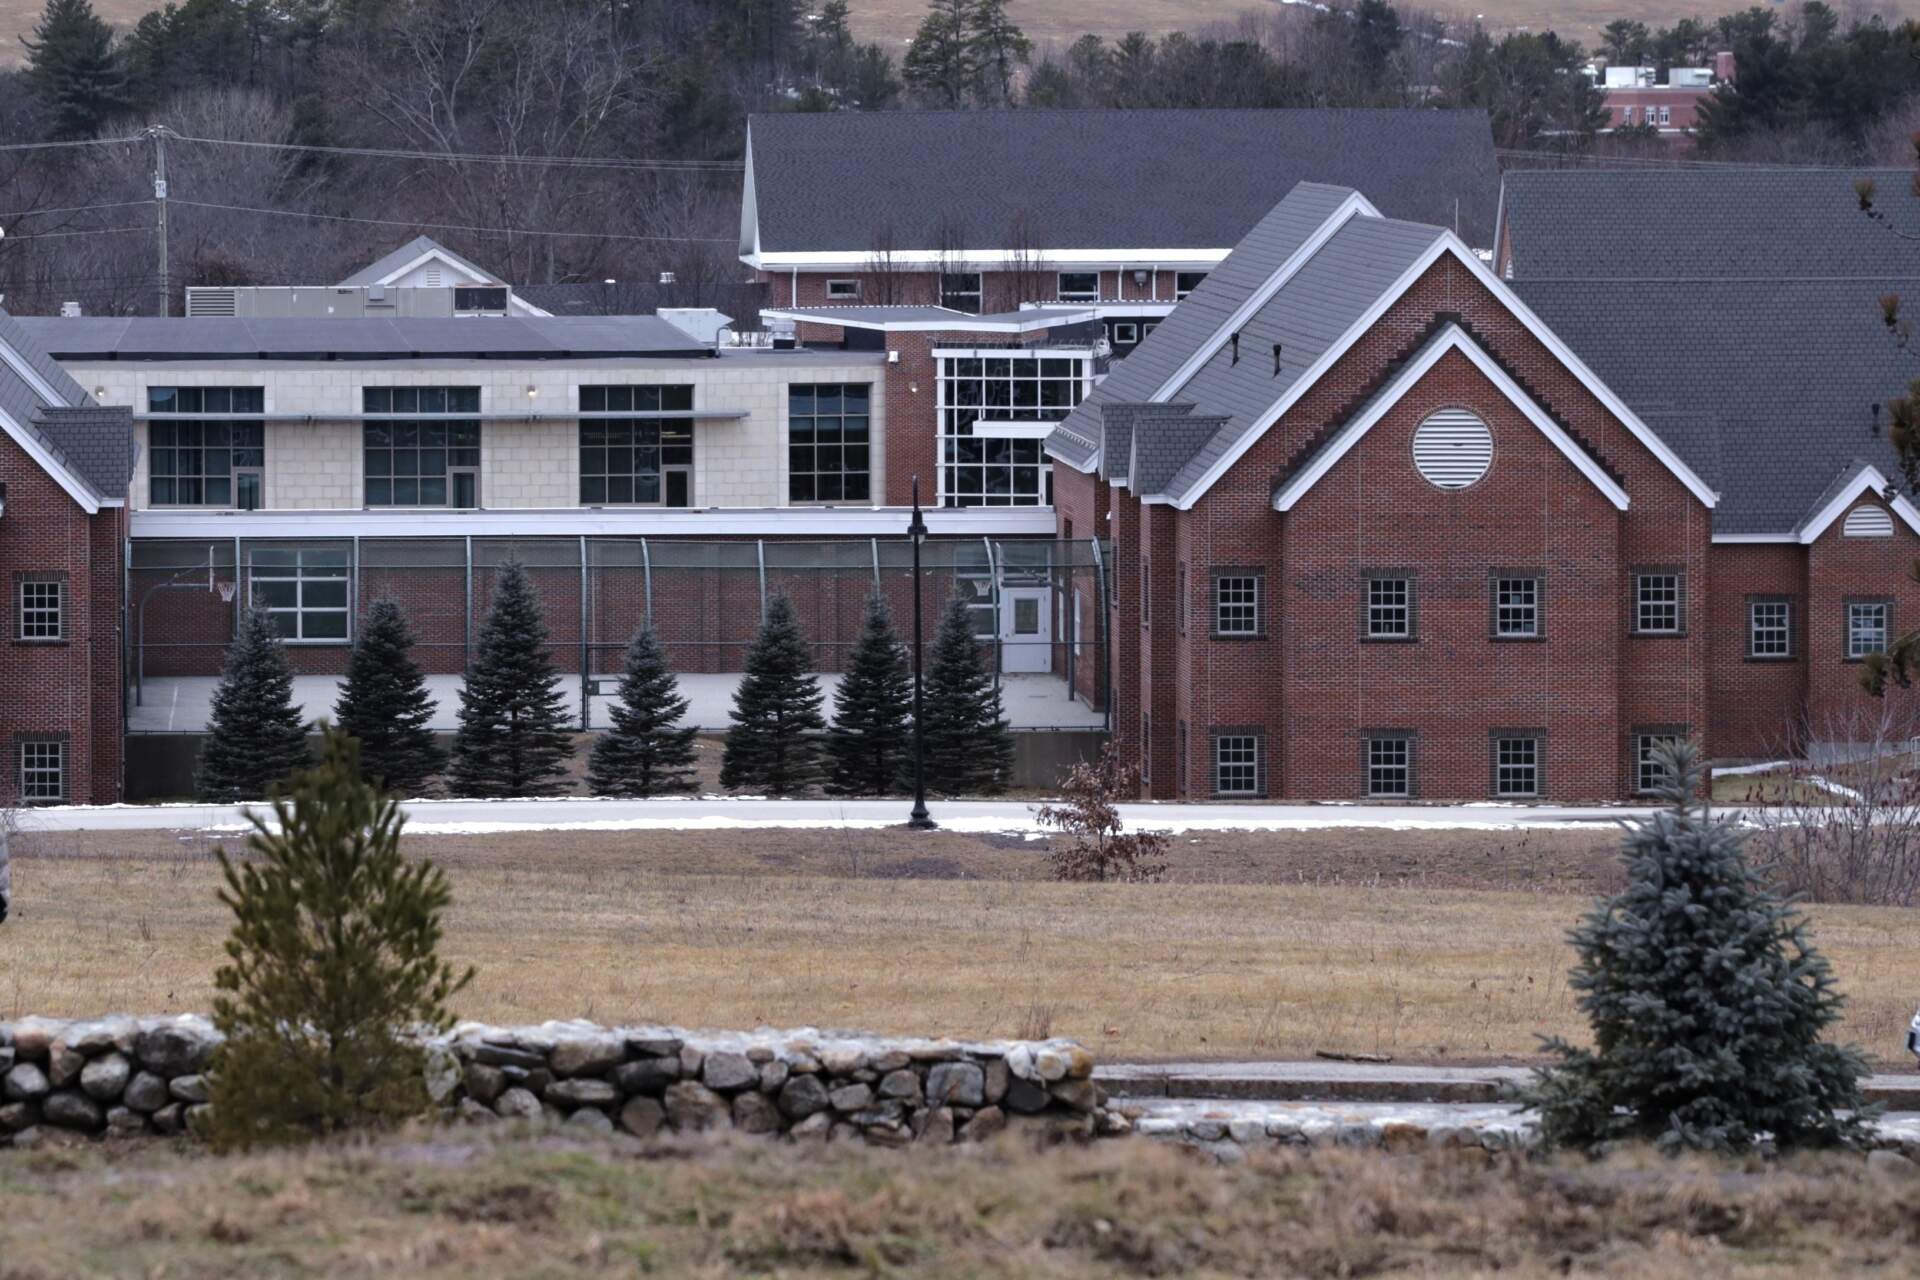 The Sununu Youth Services Center in Manchester, N.H., stands among trees, Jan. 28, 2020. (Charles Krupa/AP)